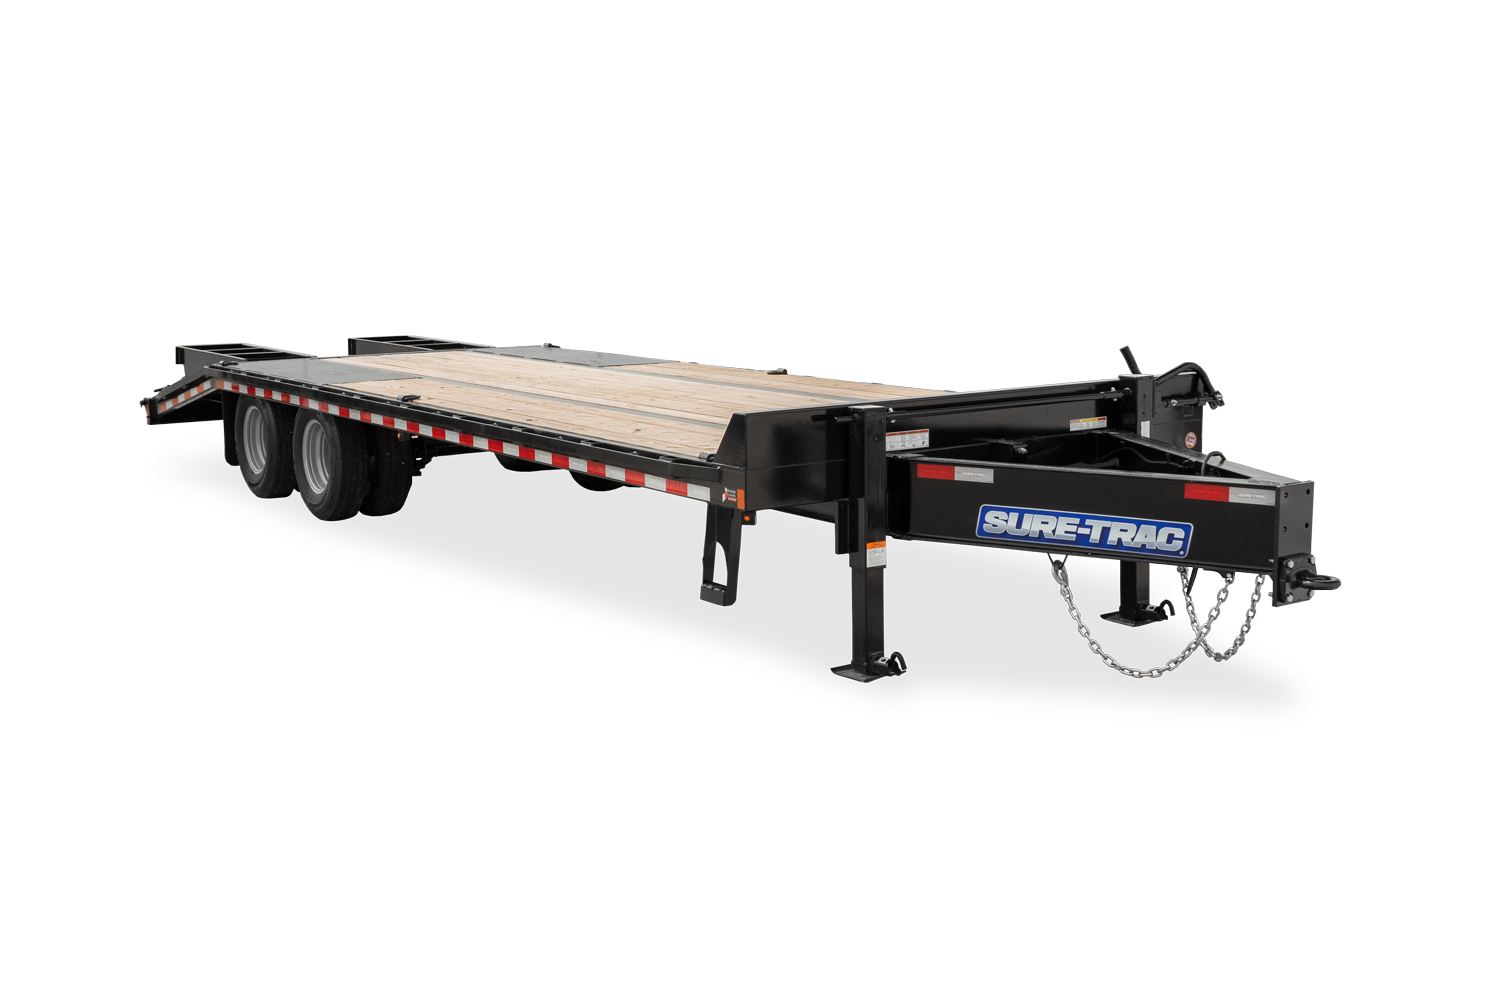 Wide Shot of the Tandem Dual Bumper Pull HD Low Profile Beavertail Deckover